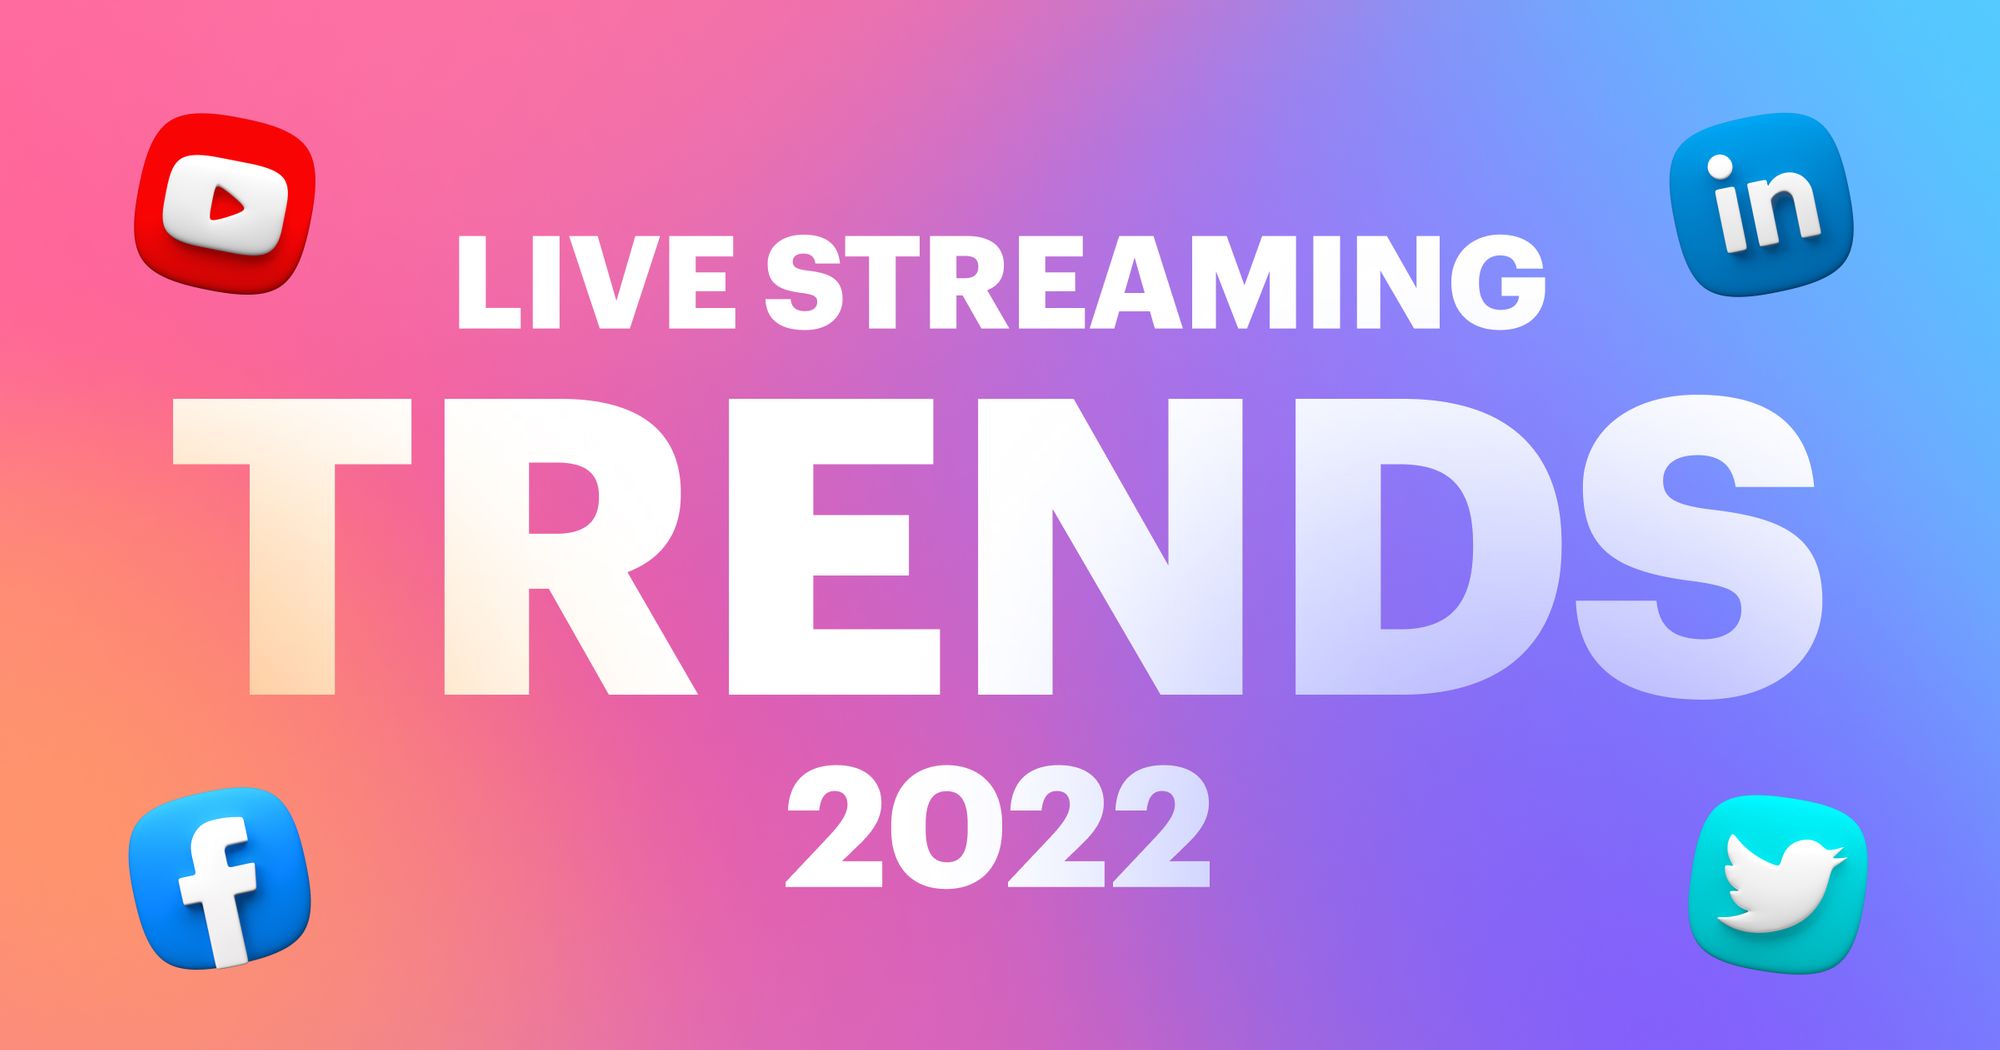 Top 13 Live Streaming Trends for 2022